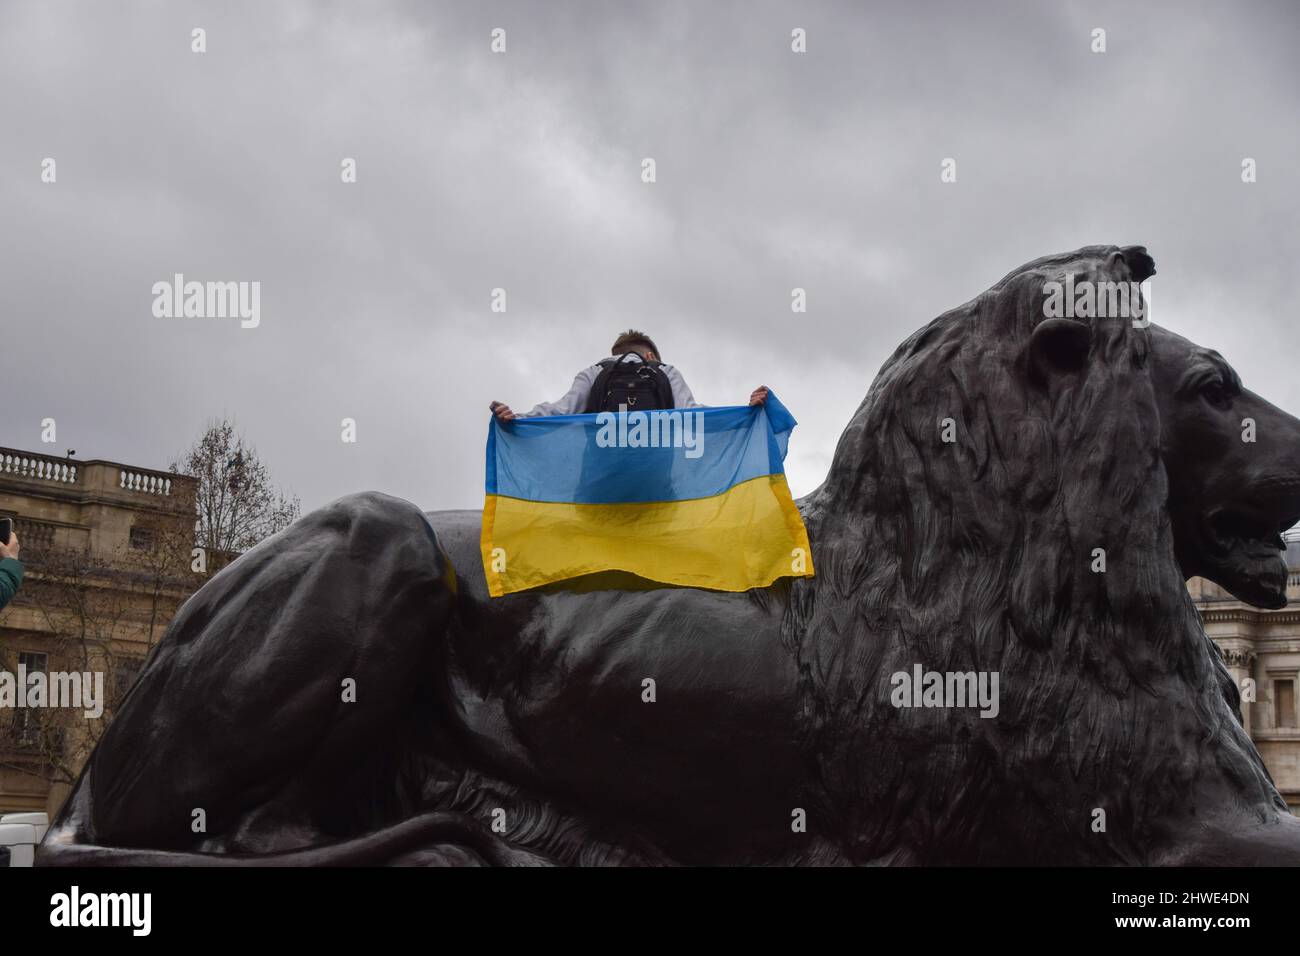 London, UK. 5th March 2022. A protester sits on a lion statue with a Ukrainian flag. Thousands of people gathered in Trafalgar Square for the eleventh day of protests, as the Russian attack on Ukraine continues. Credit: Vuk Valcic/Alamy Live News Stock Photo